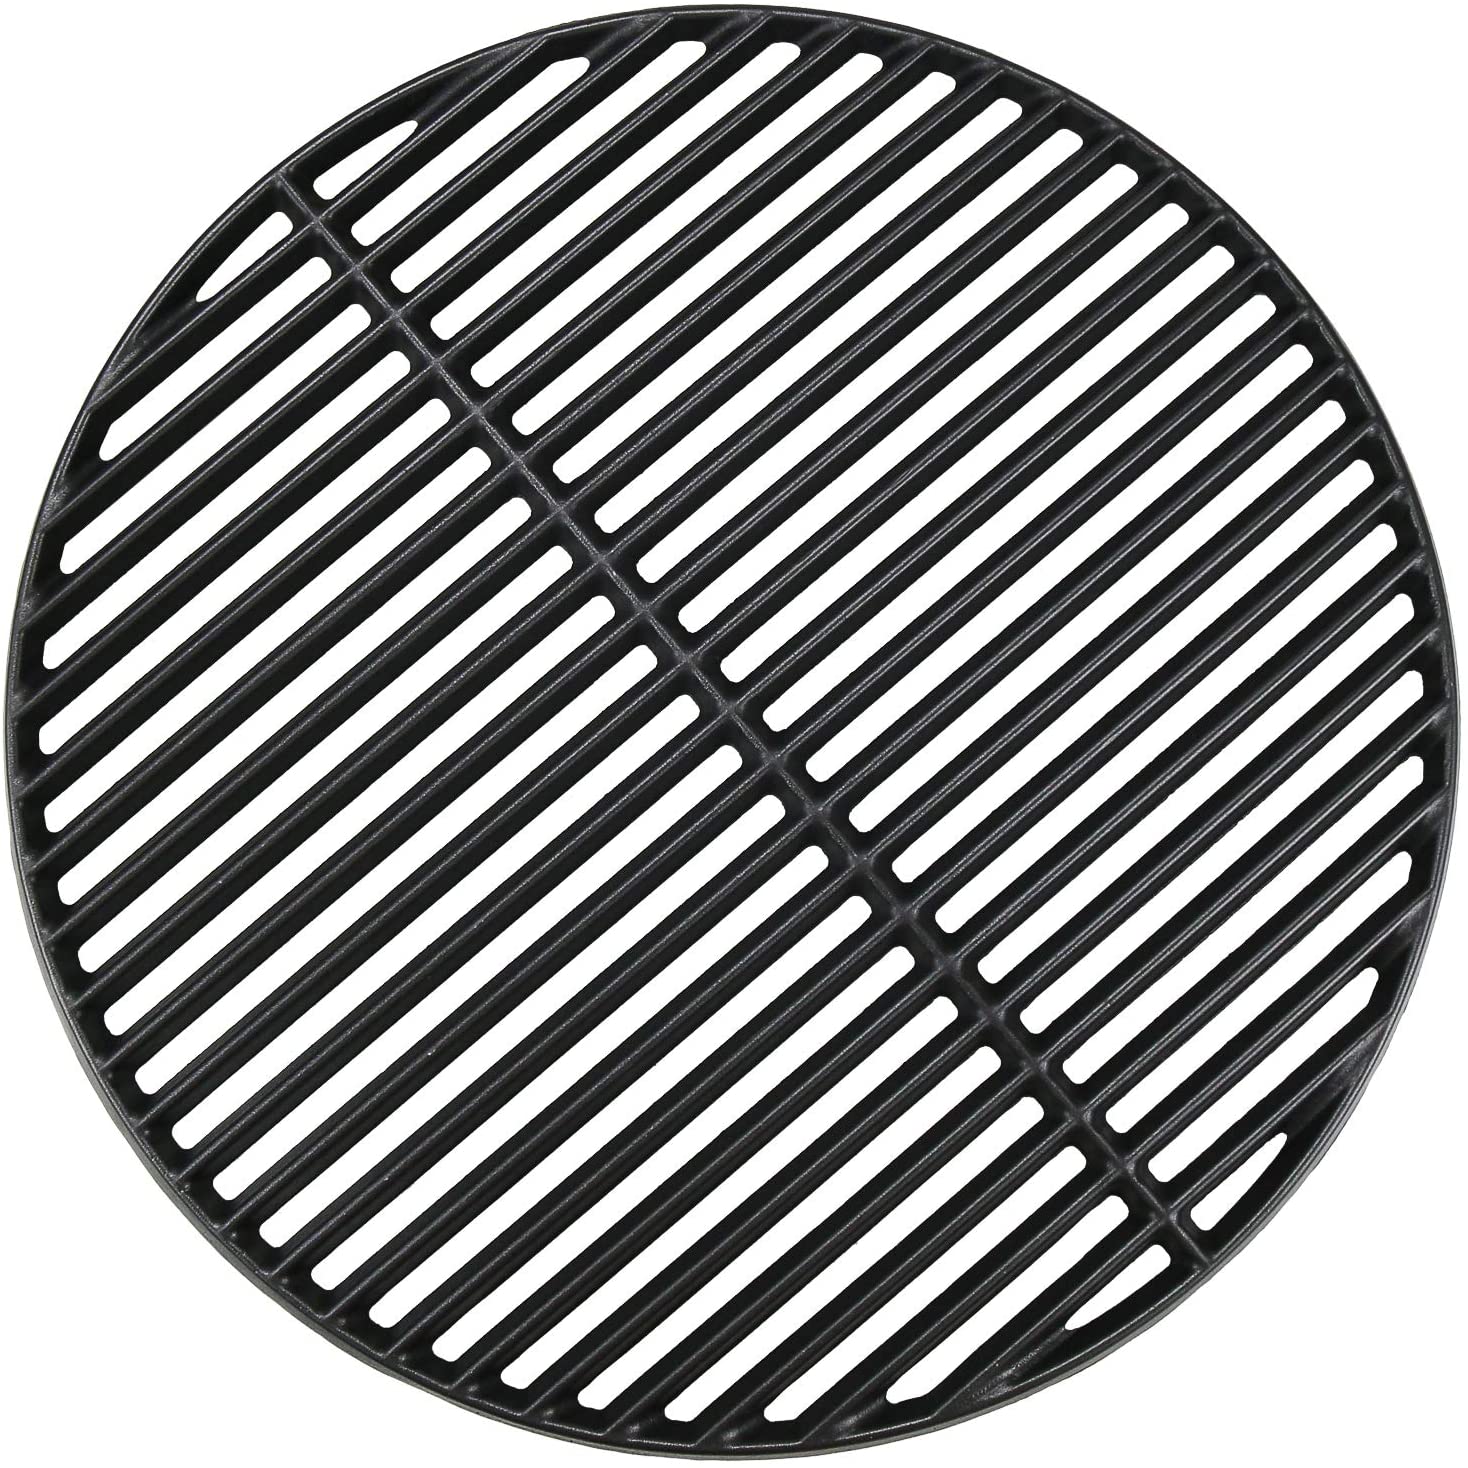 Hisencn Professional Searing Cast Iron Grill Grid, 18-Inch